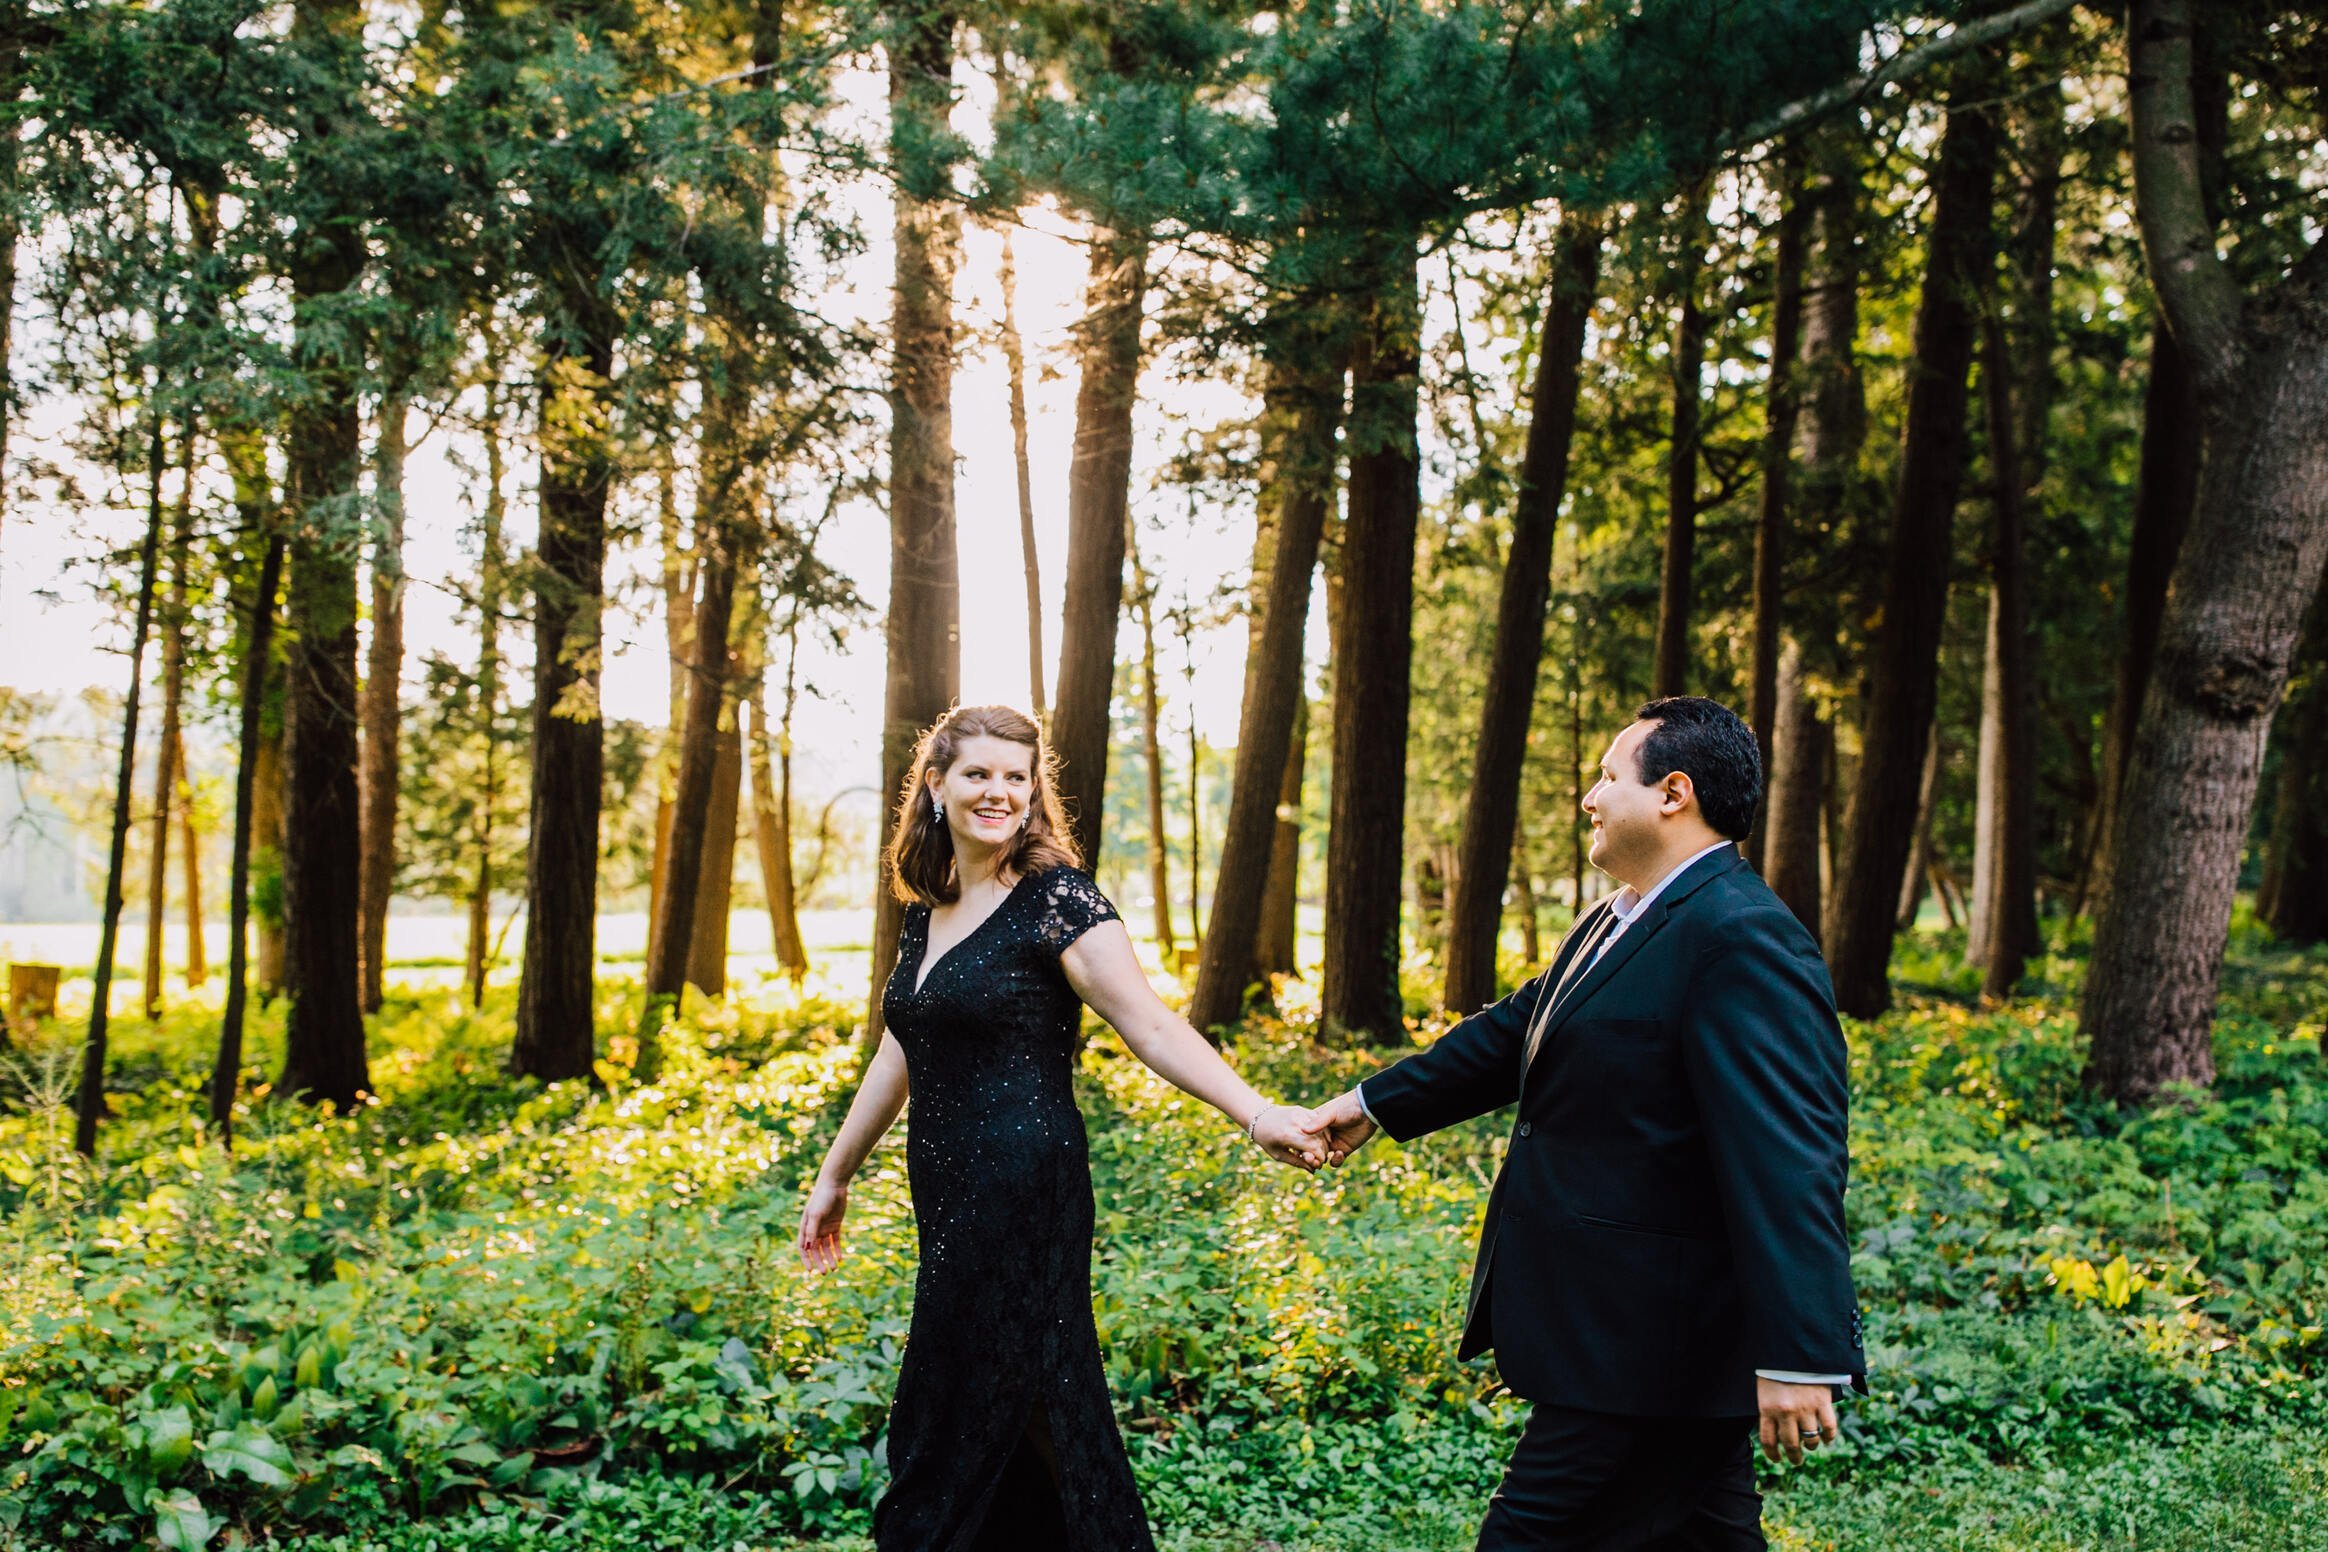  Elizabeth looks back at her husband as they walk hand in hand through woods in Cazenovia, NY for their anniversary 